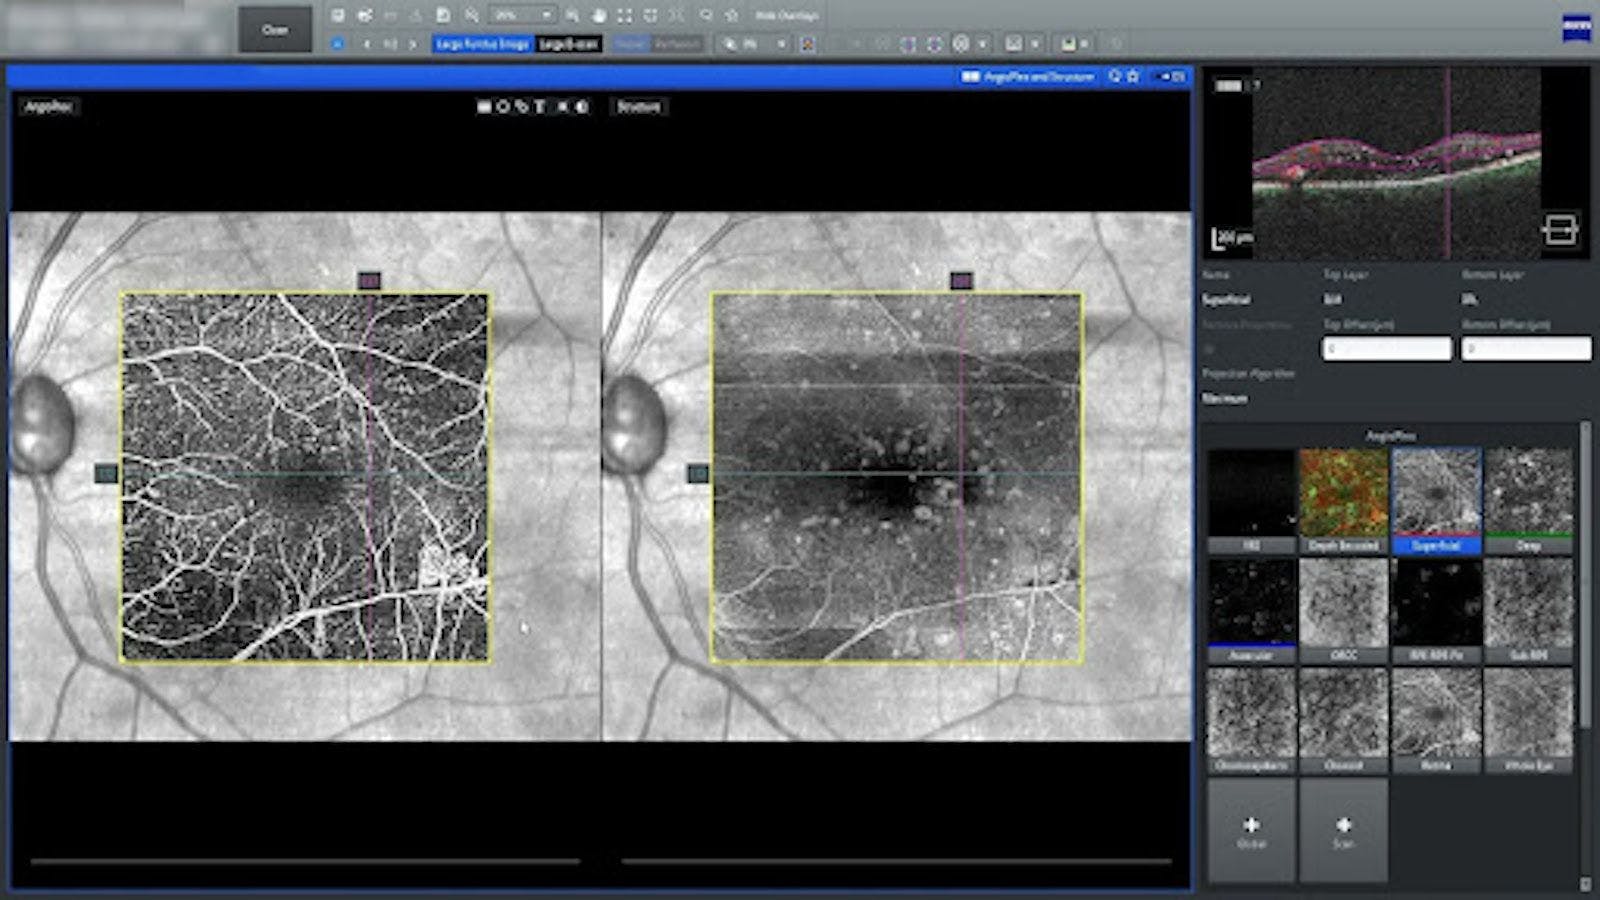 OCTA imaging of retinal and optic disc neovascularization